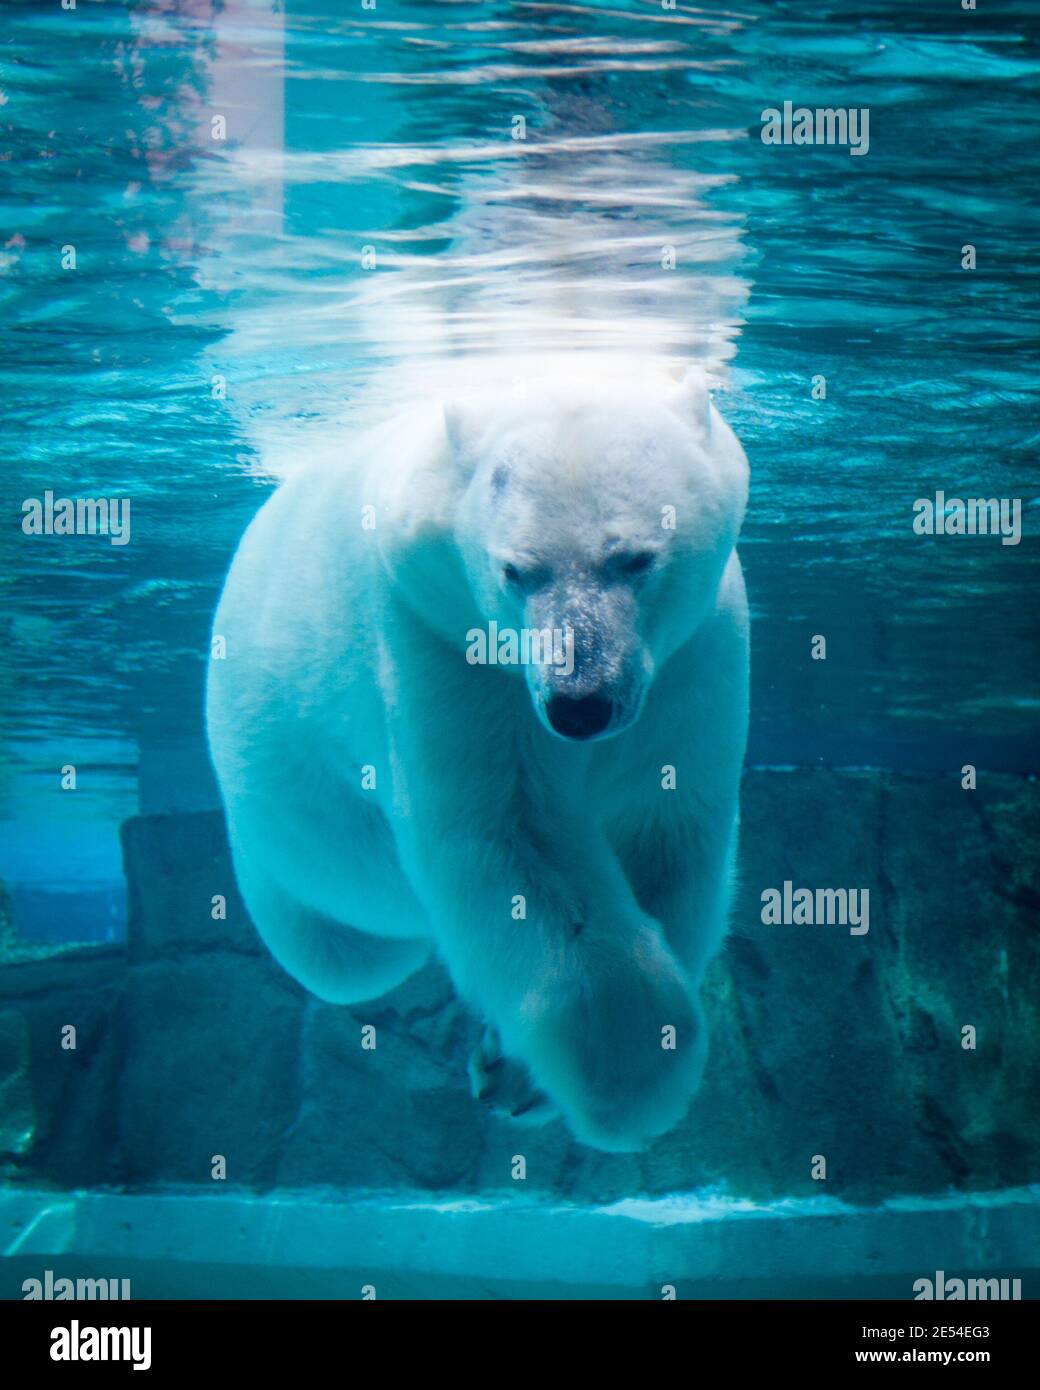 Anana, the resident female polar bear of Lincoln Park Zoo in Chicago, swims underwater on a hot summer's day. Stock Photo